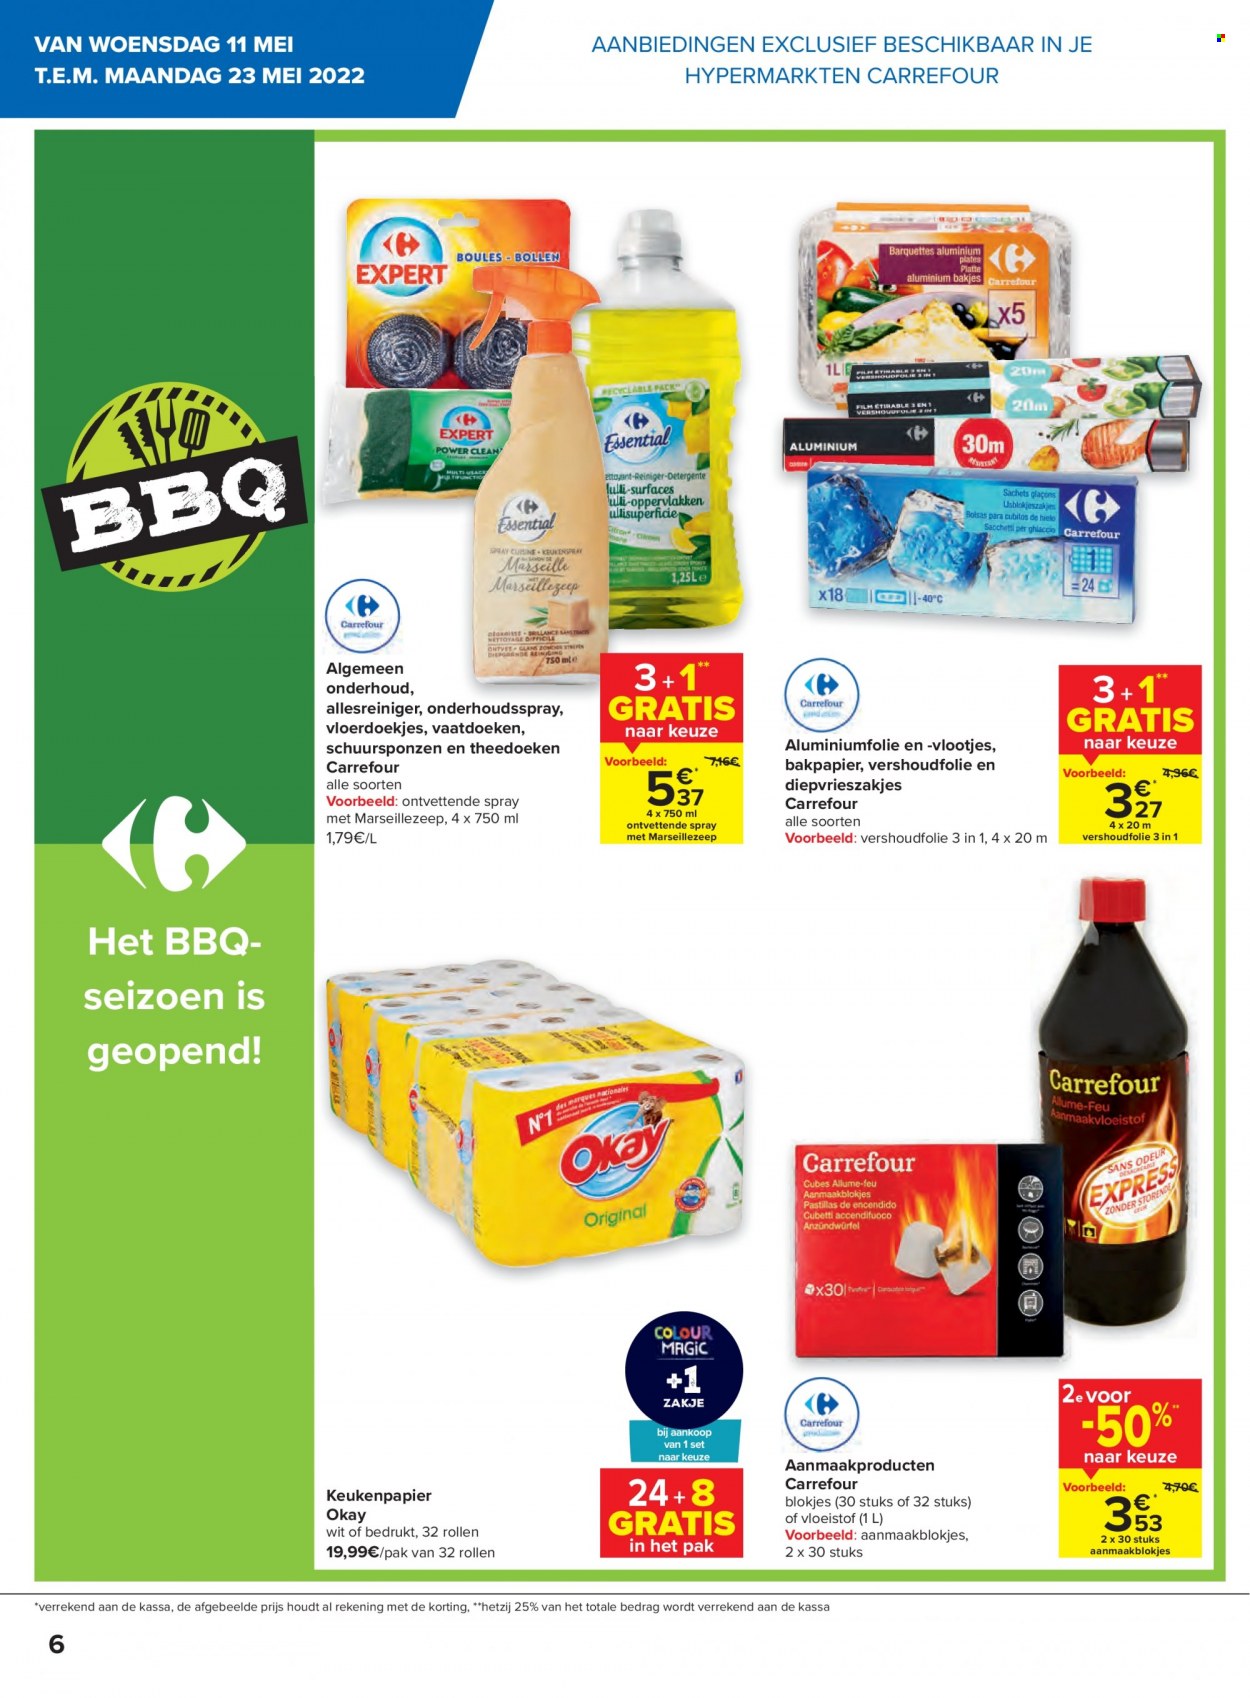 Catalogue Carrefour hypermarkt - 11.5.2022 - 23.5.2022. Page 6.